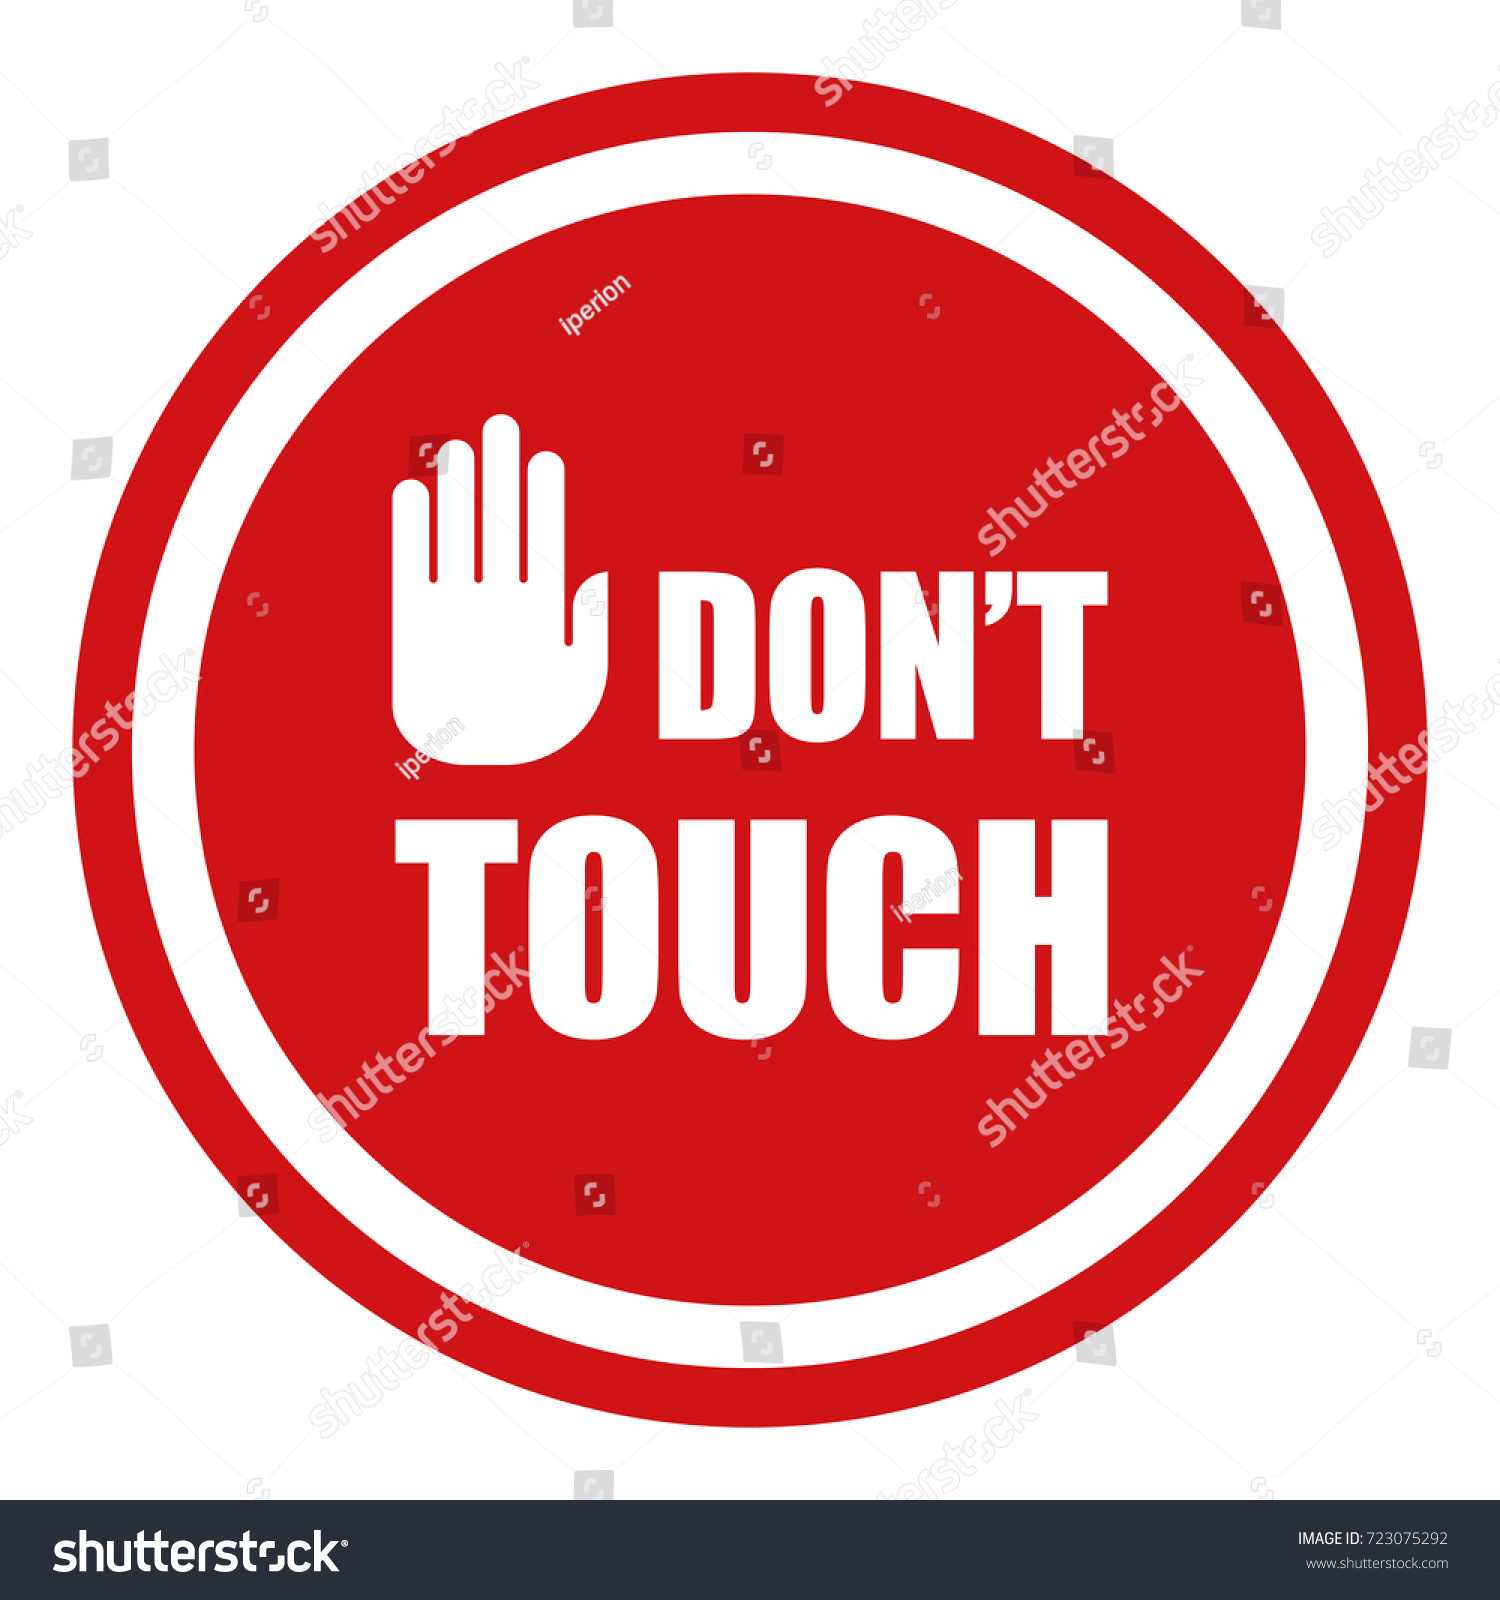 Don t touch 2. Знак don't stop. Stop Warning. Don't Touch!. Don't stop без фона.